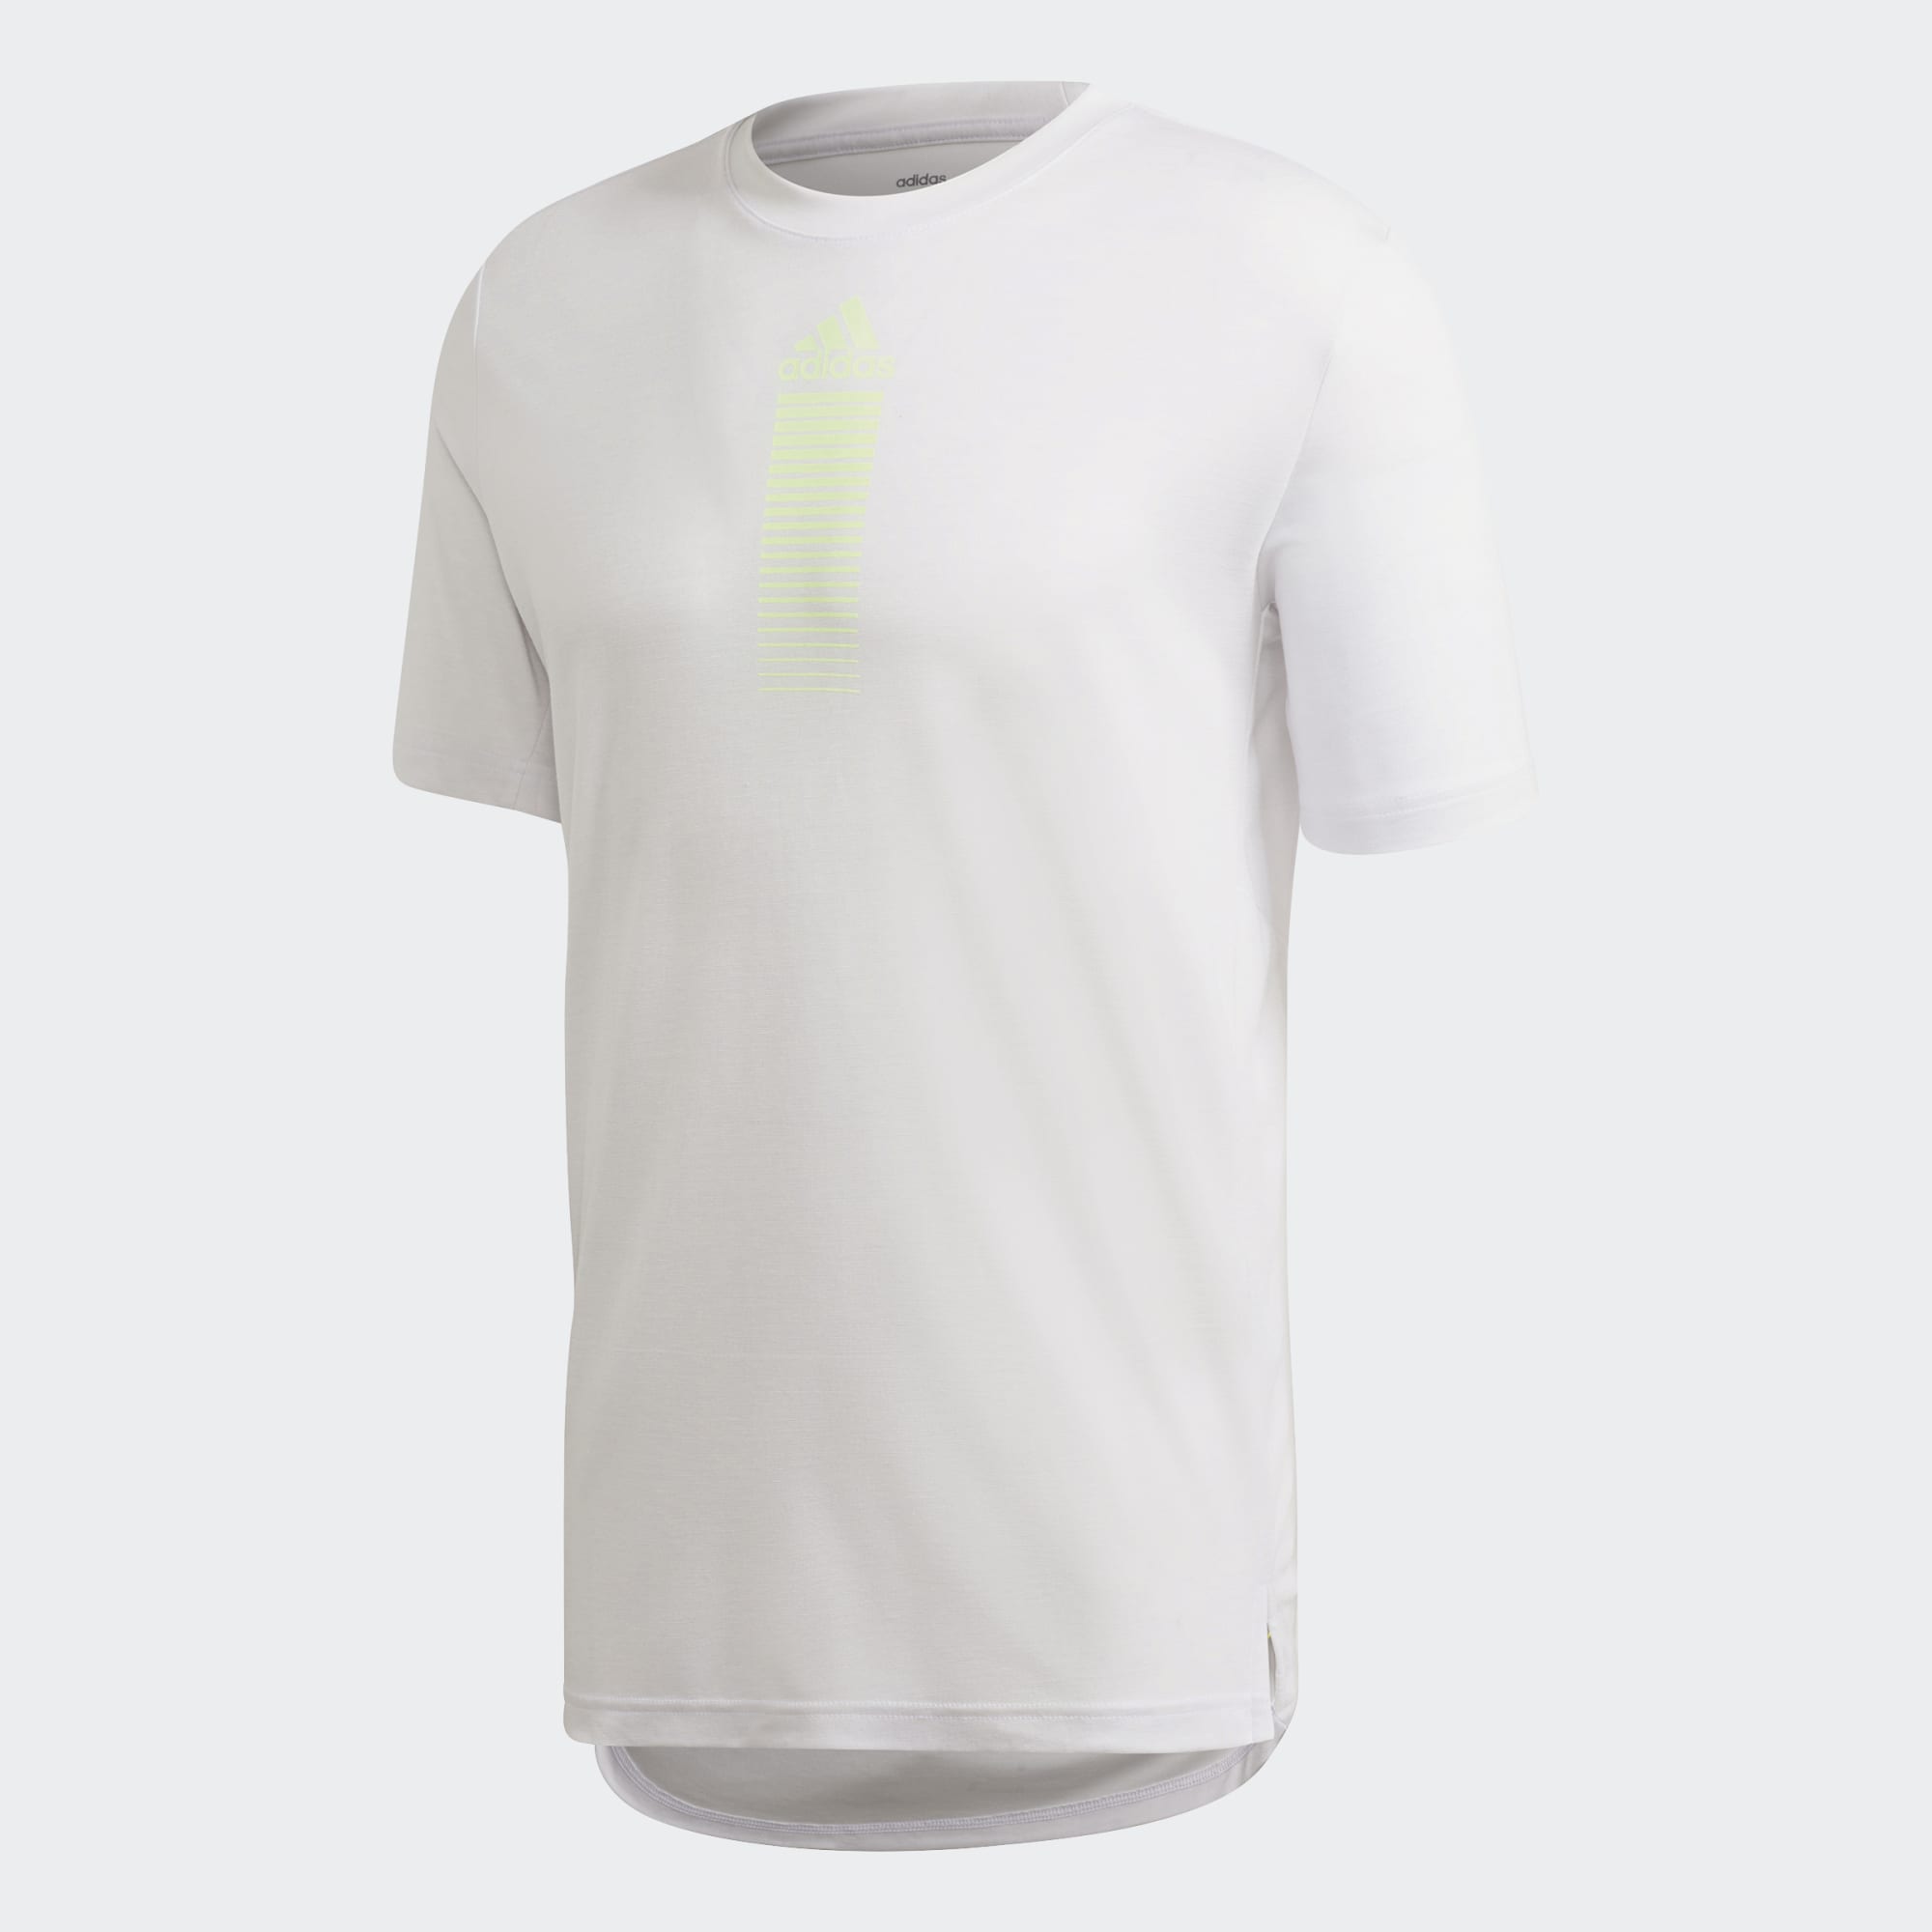 Activated tech tee white